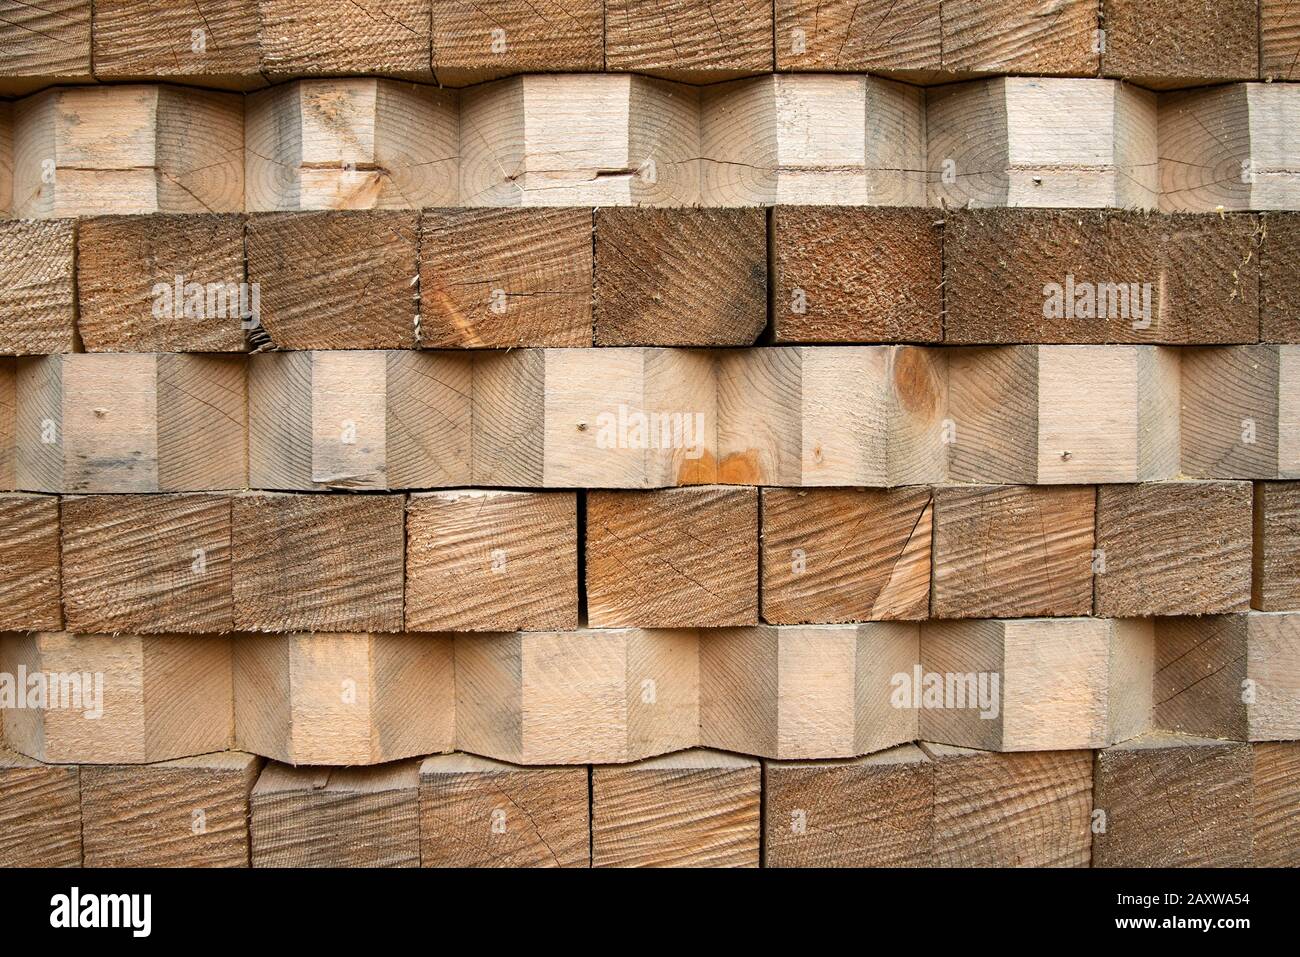 Wood stack with beveled wooden beams, texture. Close up photo of stacked wood beams in the factory Stock Photo